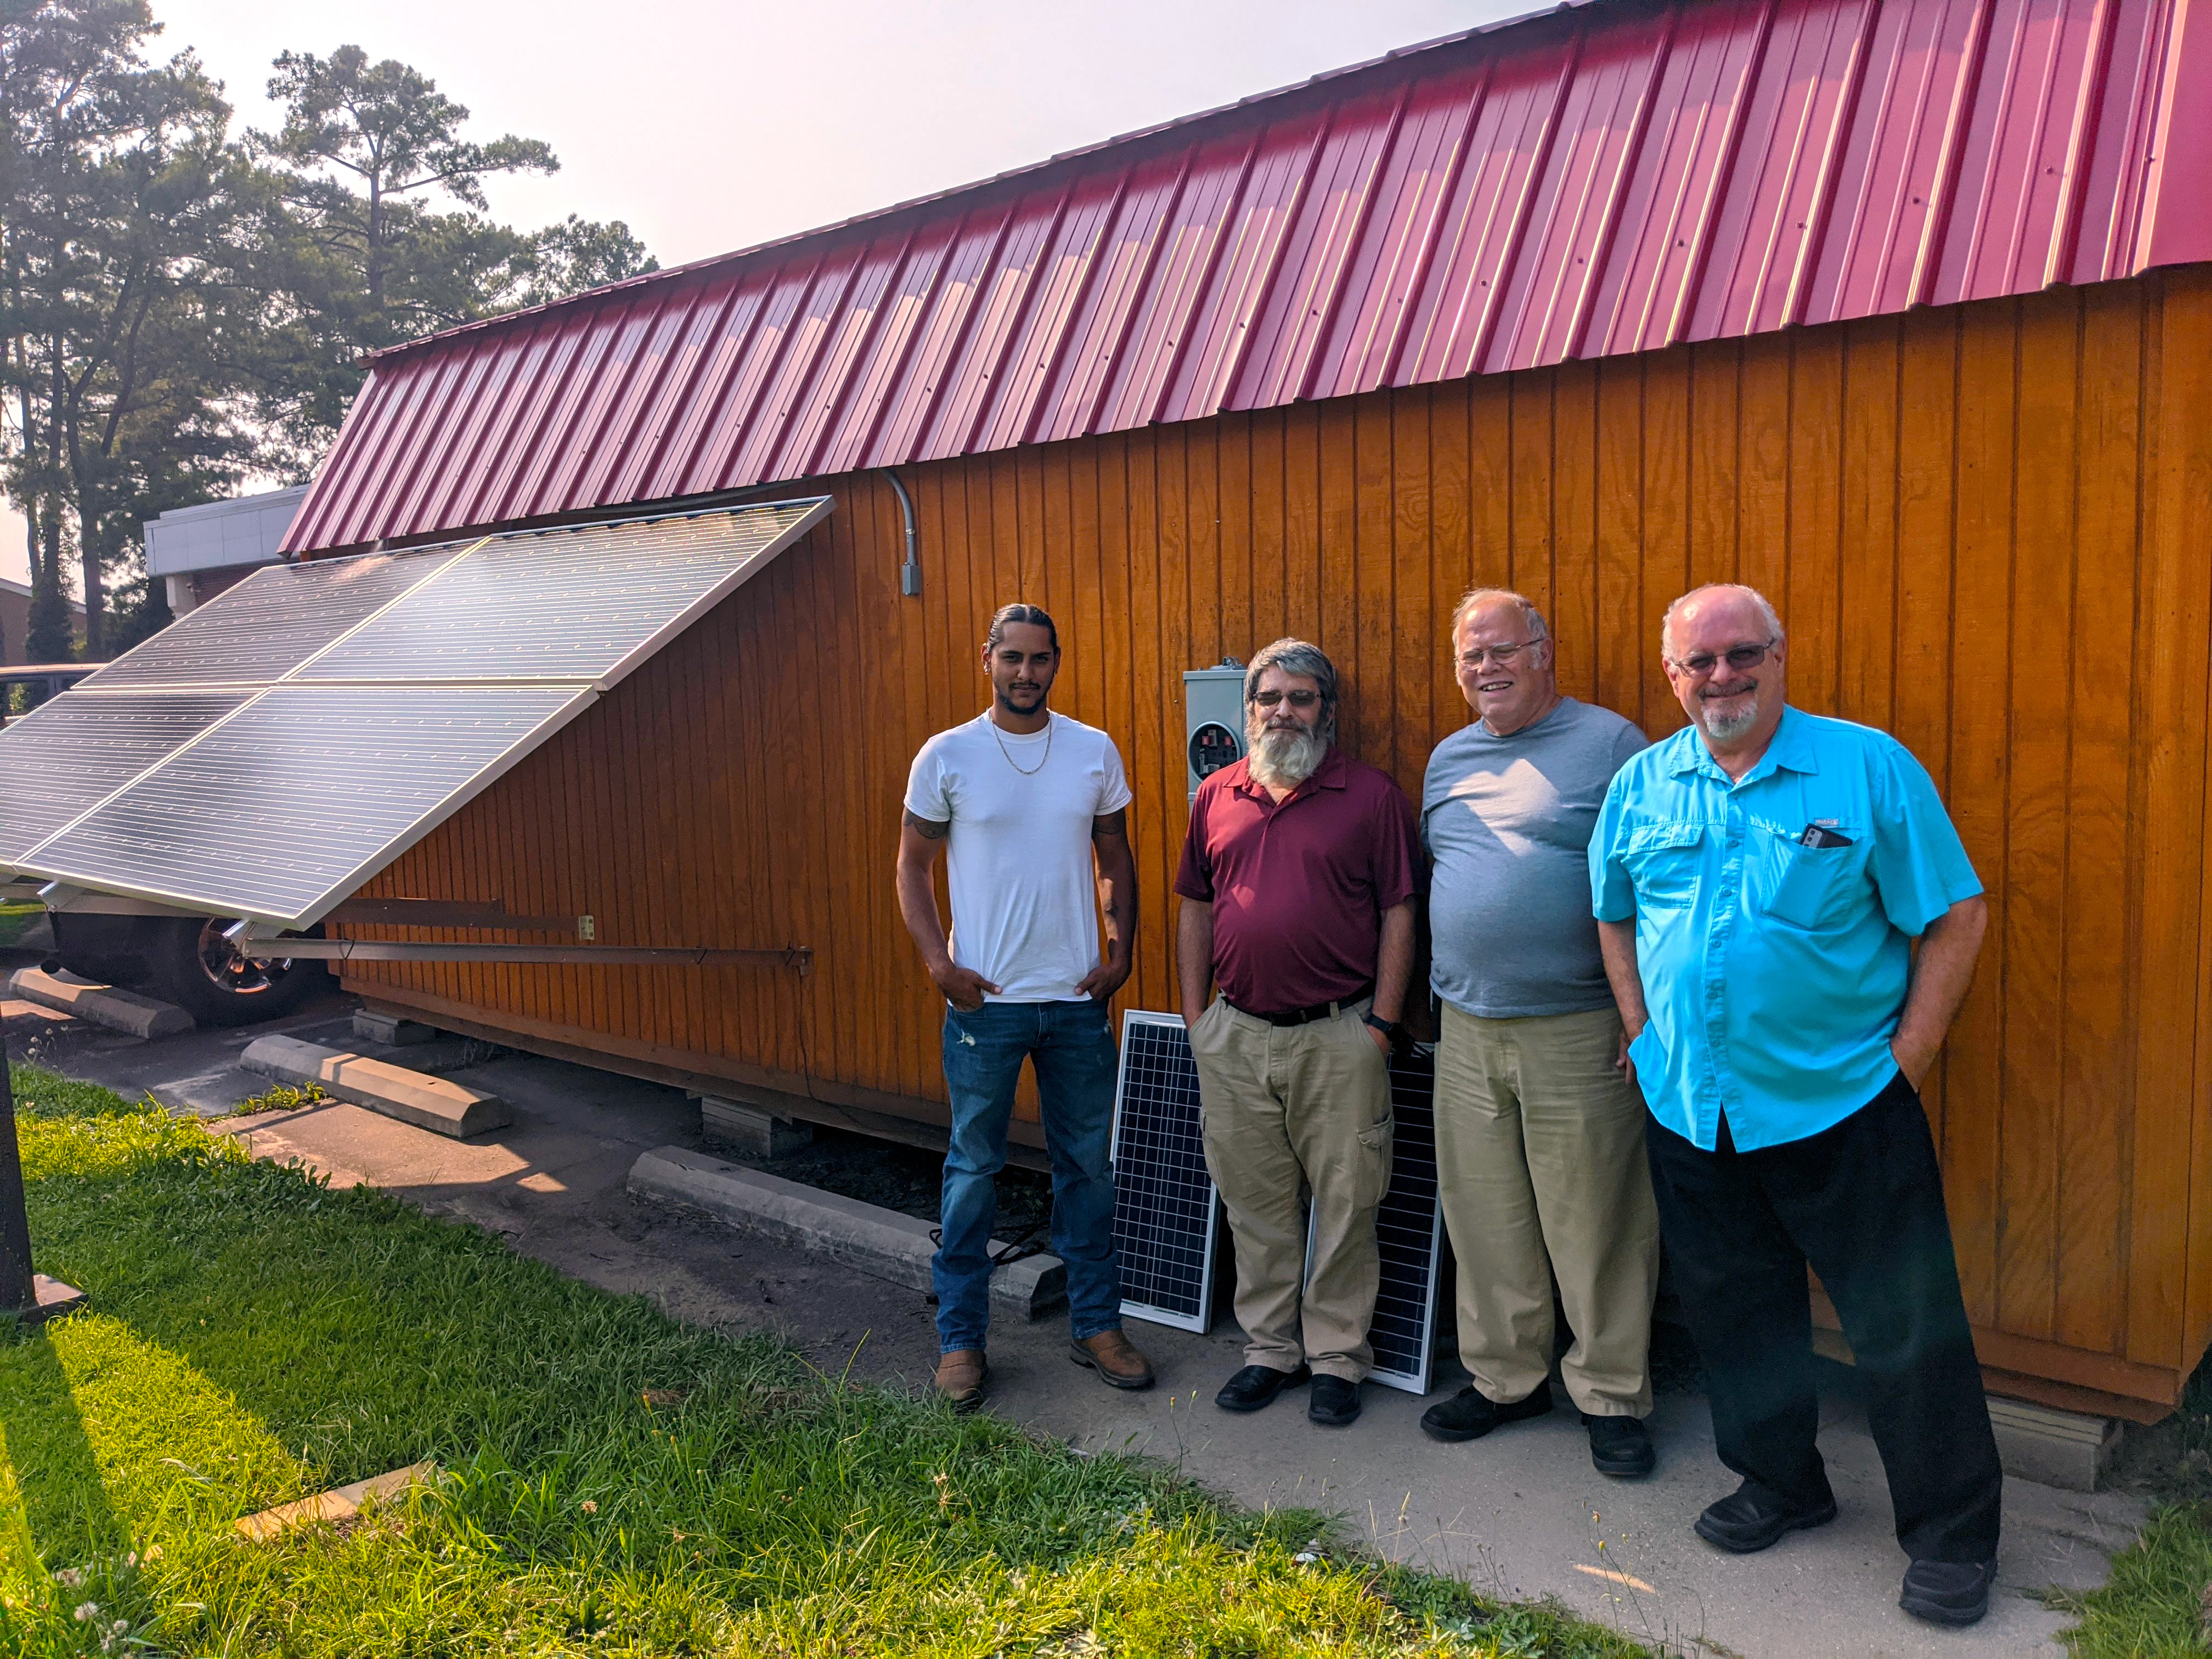 Students and instructor stand next to the solar shed